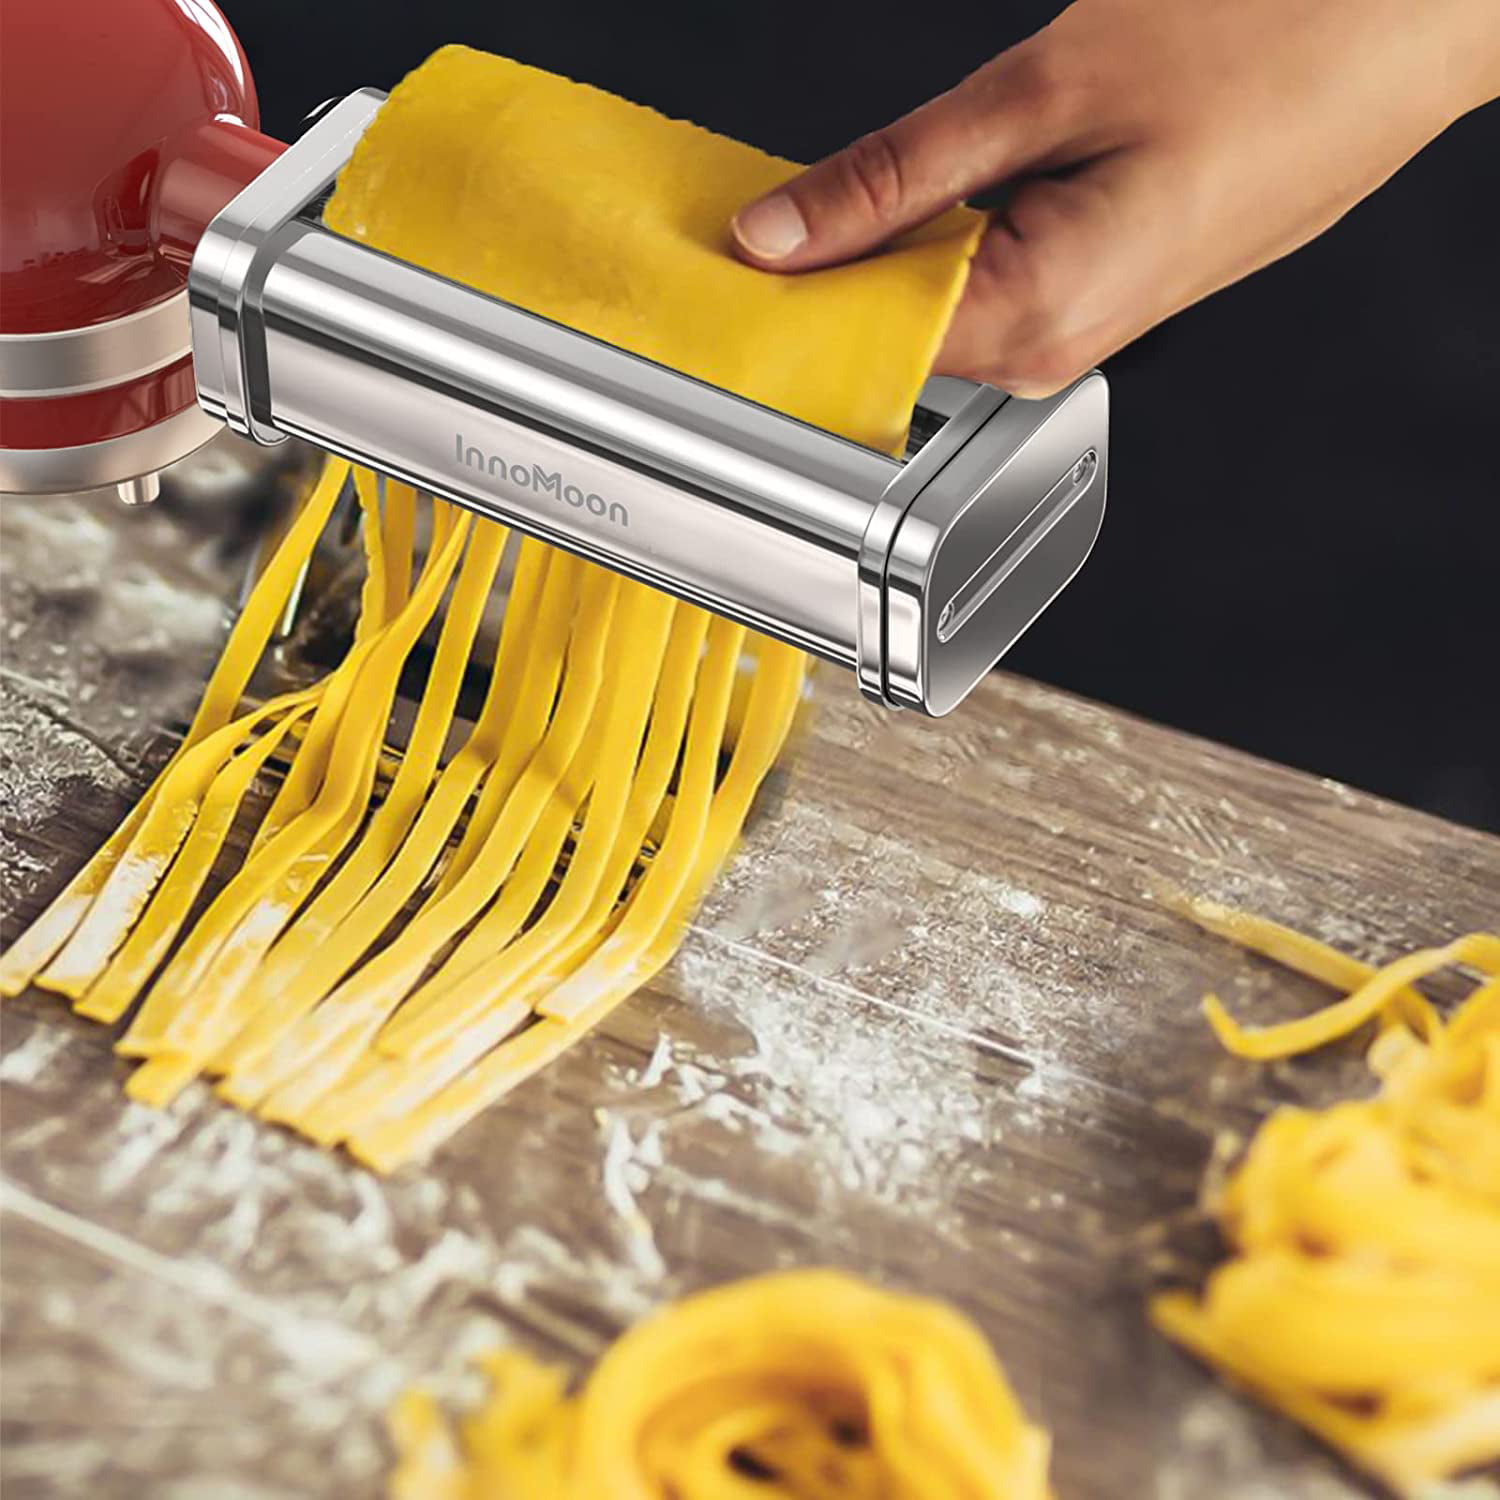 TZCYOTO Pasta Maker 3-in-1 Attachment for KitchenAid Stand Mixers, Including Fettuccine and Spaghetti Cutter, Pasta Sheet Roller, Pasta Maker